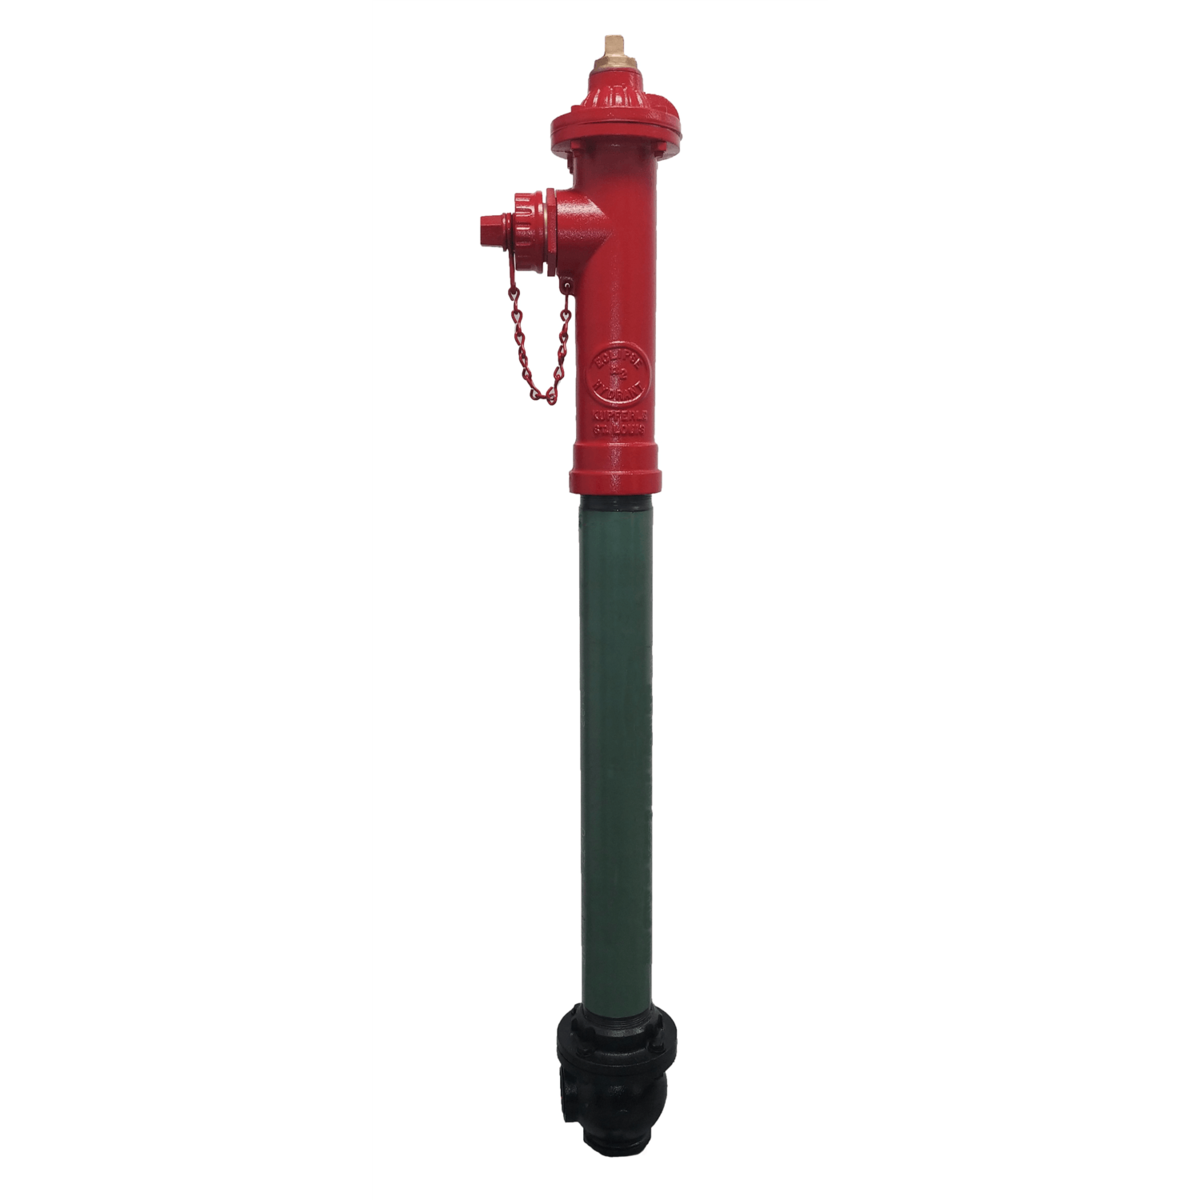 Kupferle Eclipse #2 Post Flushing Hydrant with 2" FIP Inlet, Standard Depth of Bury 3'